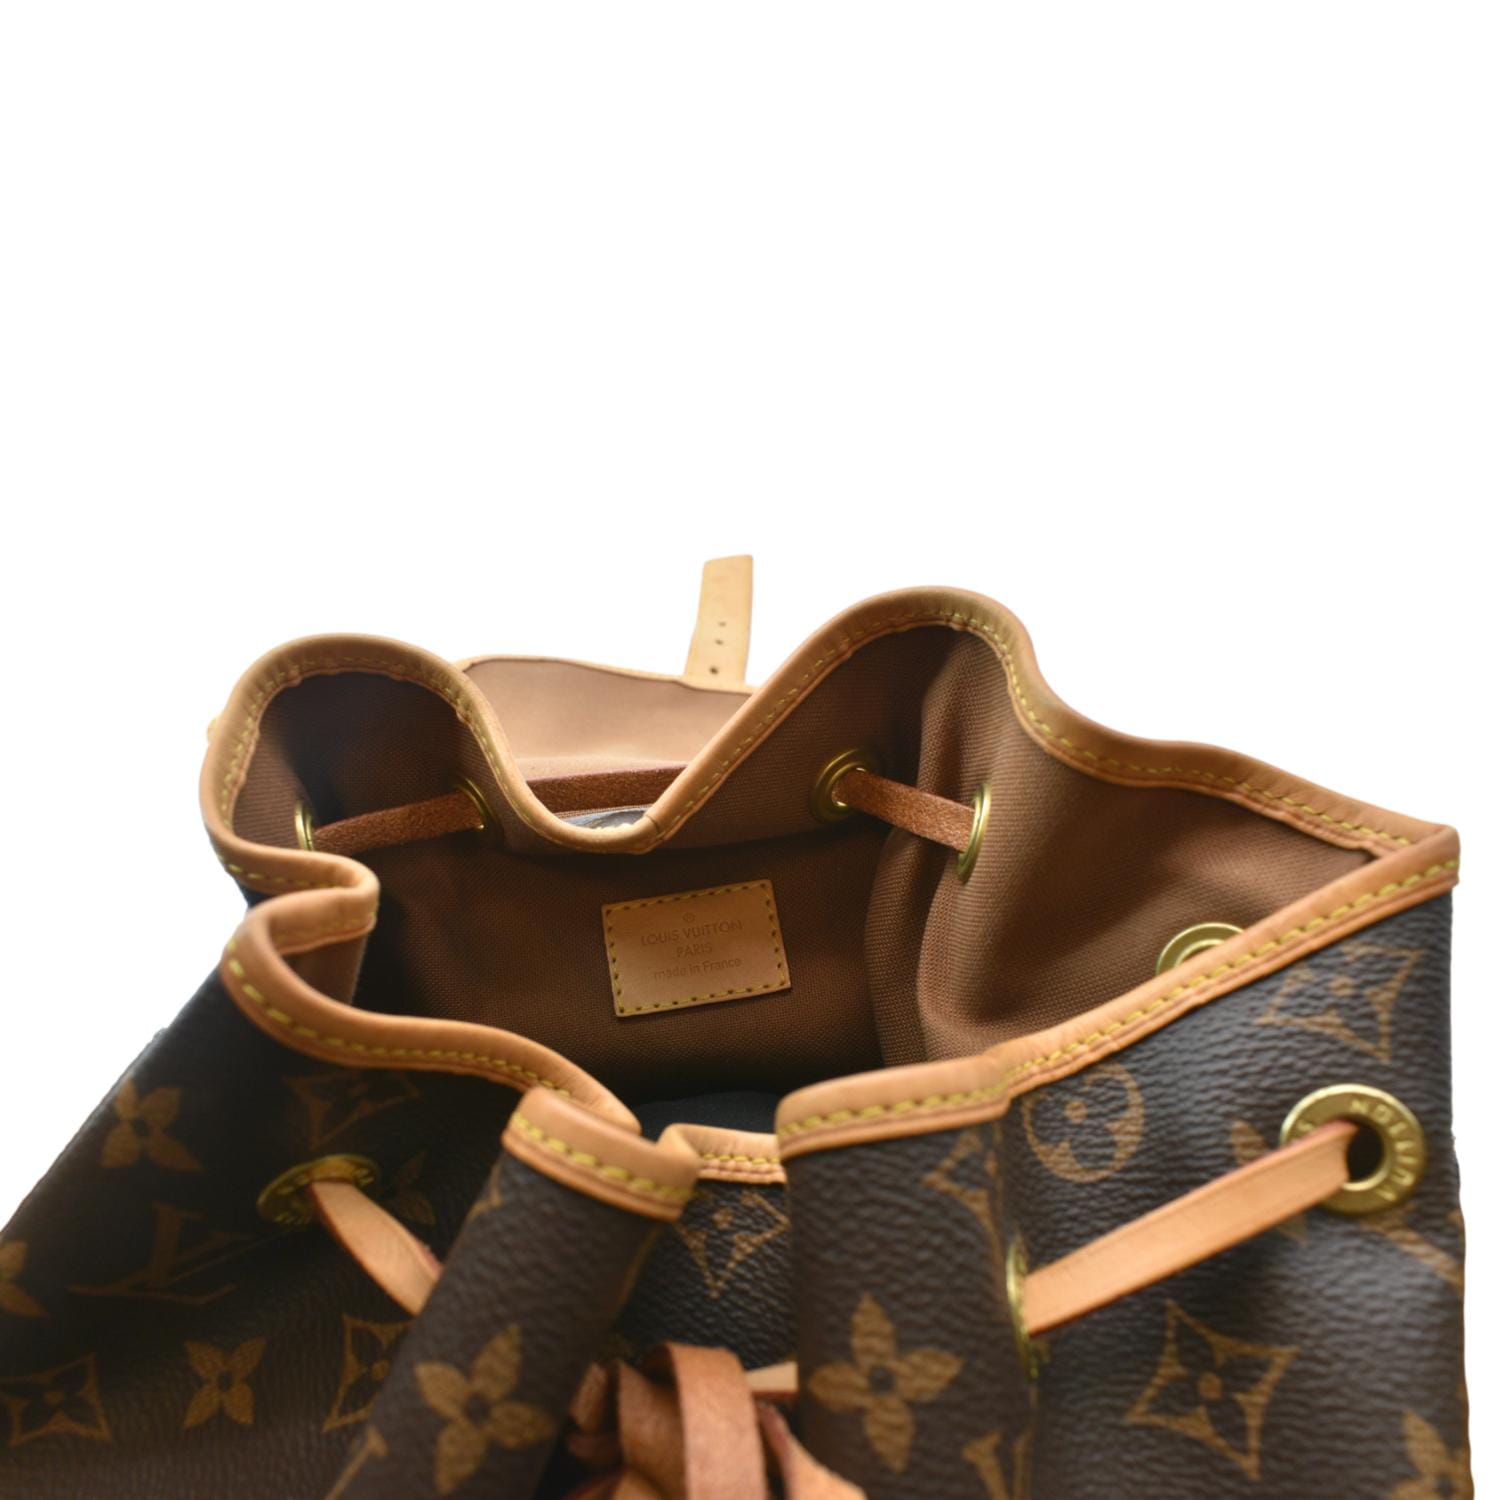 Only 798.00 usd for LOUIS VUITTON Sac A Dos Bosphore Monogram Canvas  Backpack Bag Brown Online at the Shop